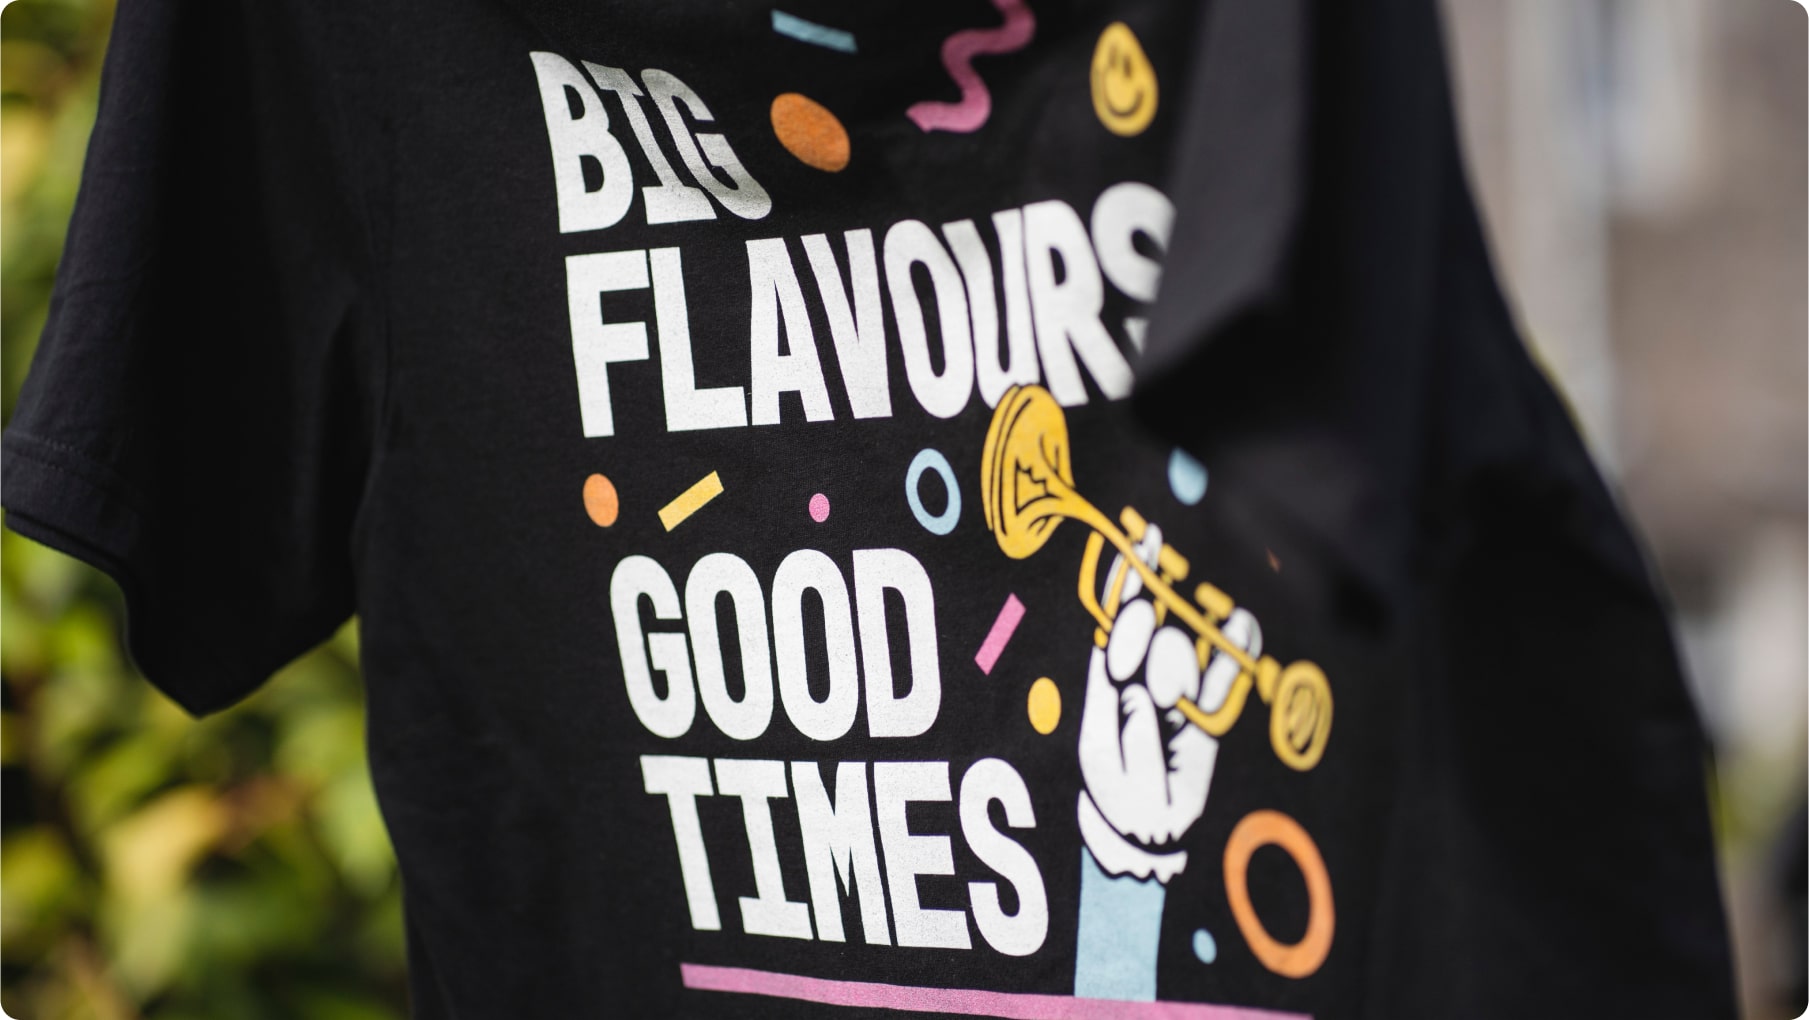 Big flavours, good times image